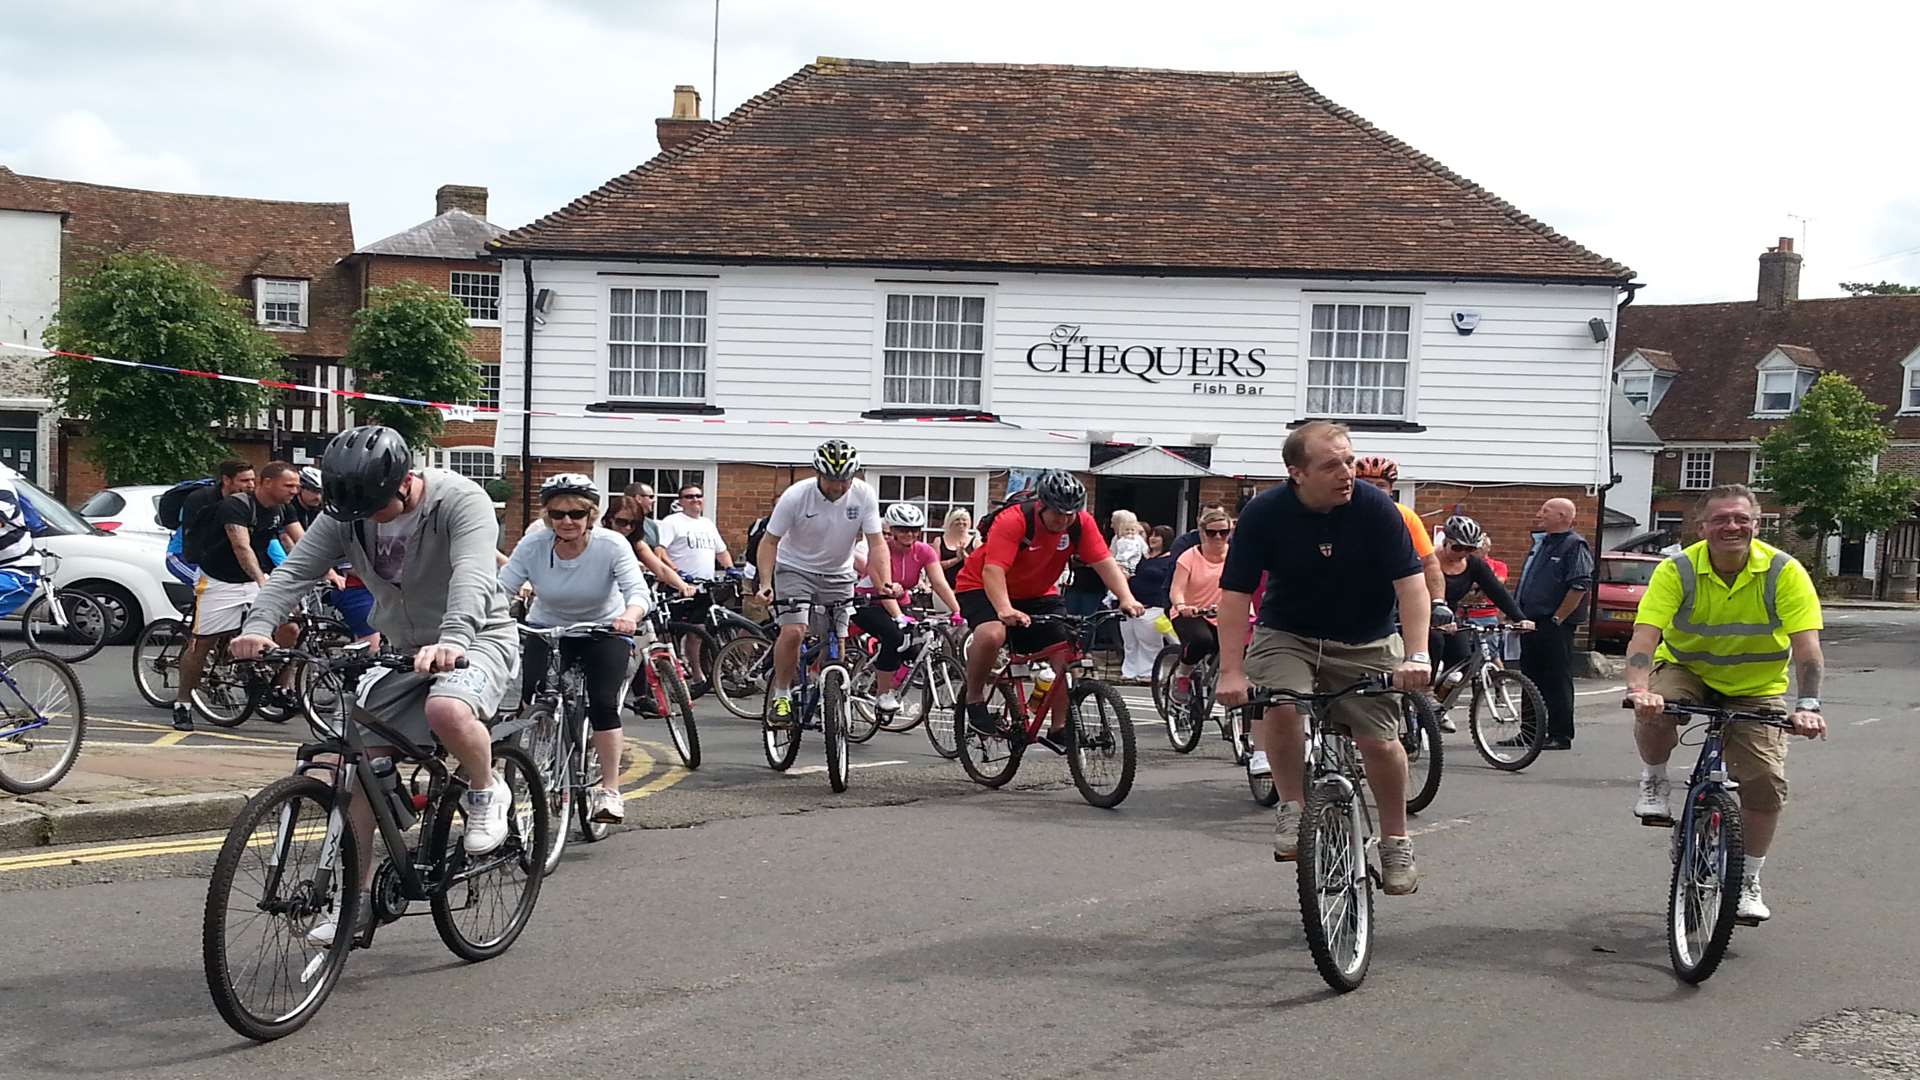 The cyclists will start and finish in Lenham